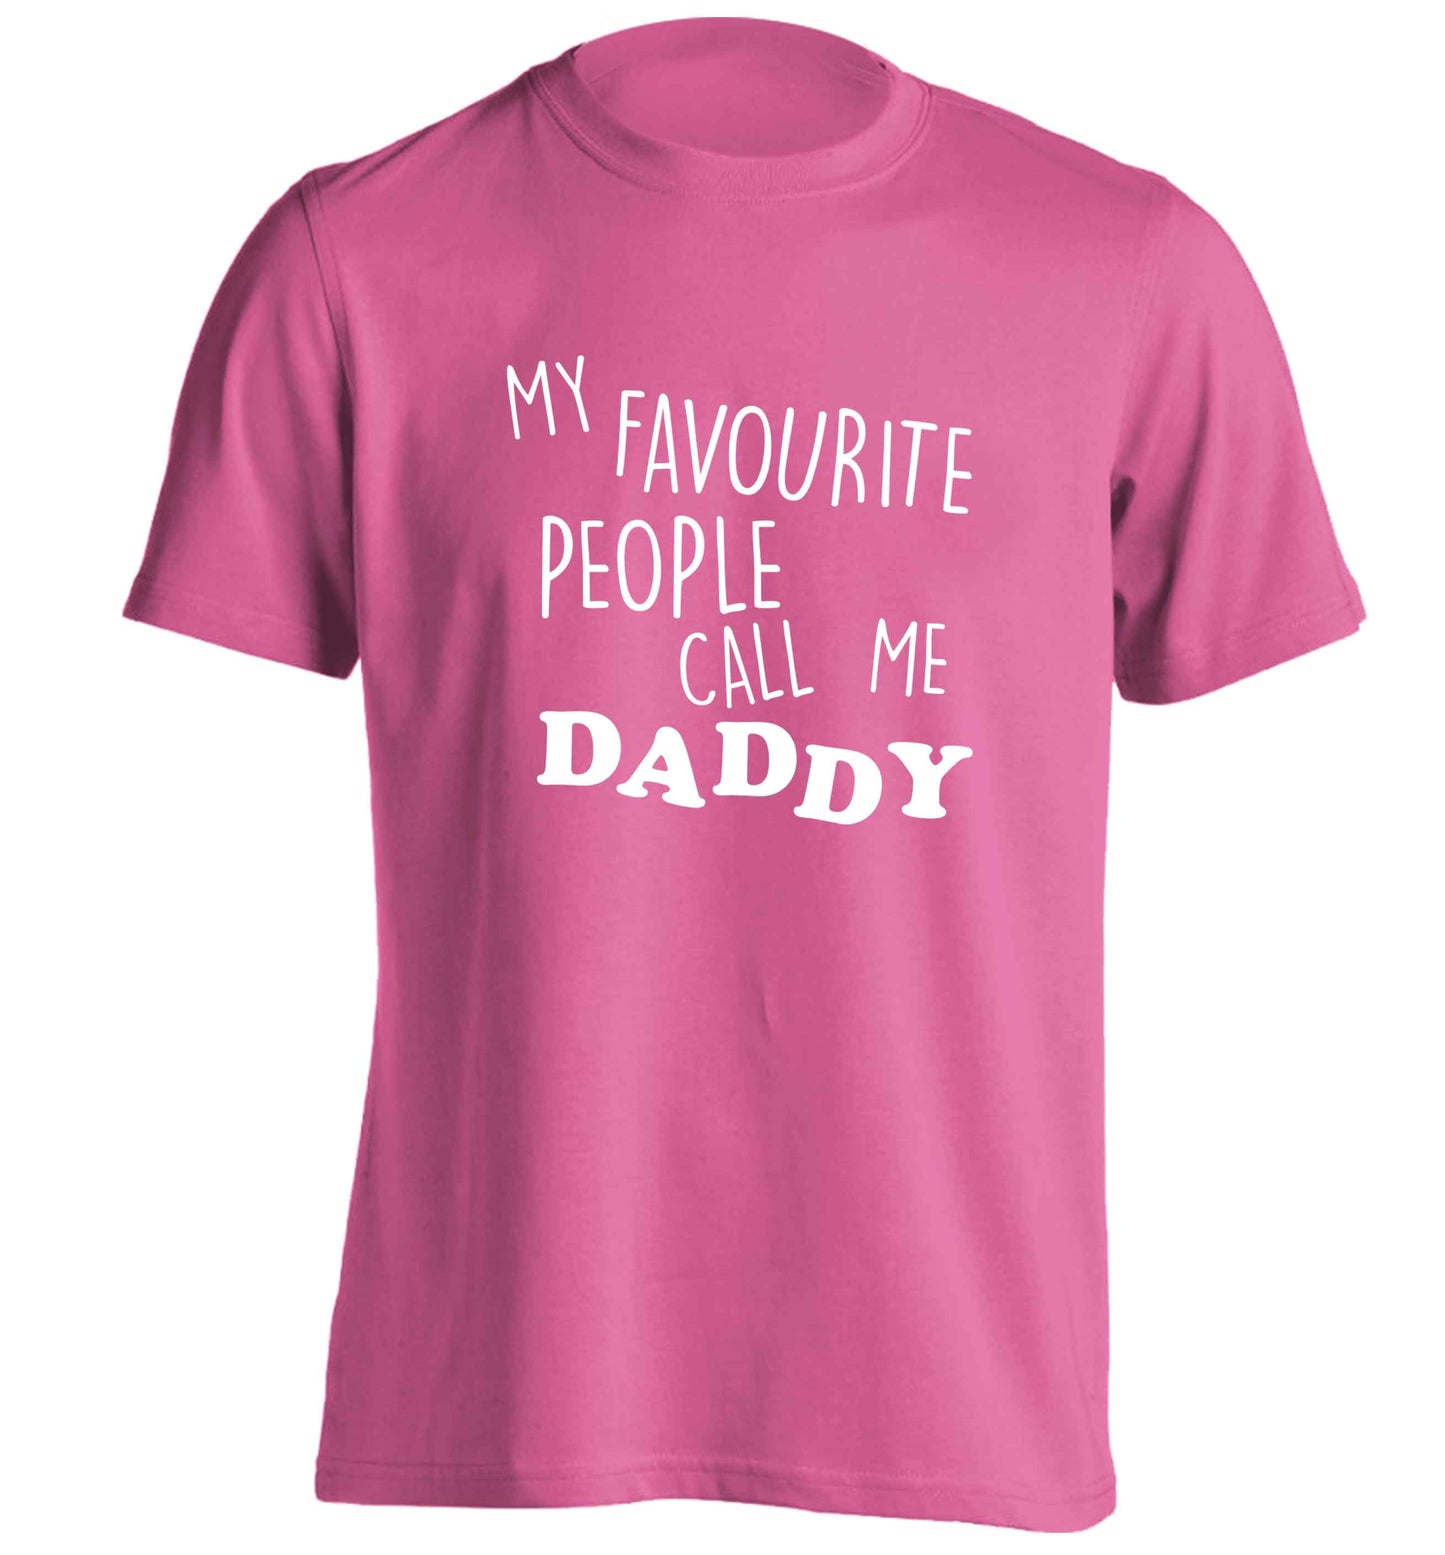 My favourite people call me daddy adults unisex pink Tshirt 2XL